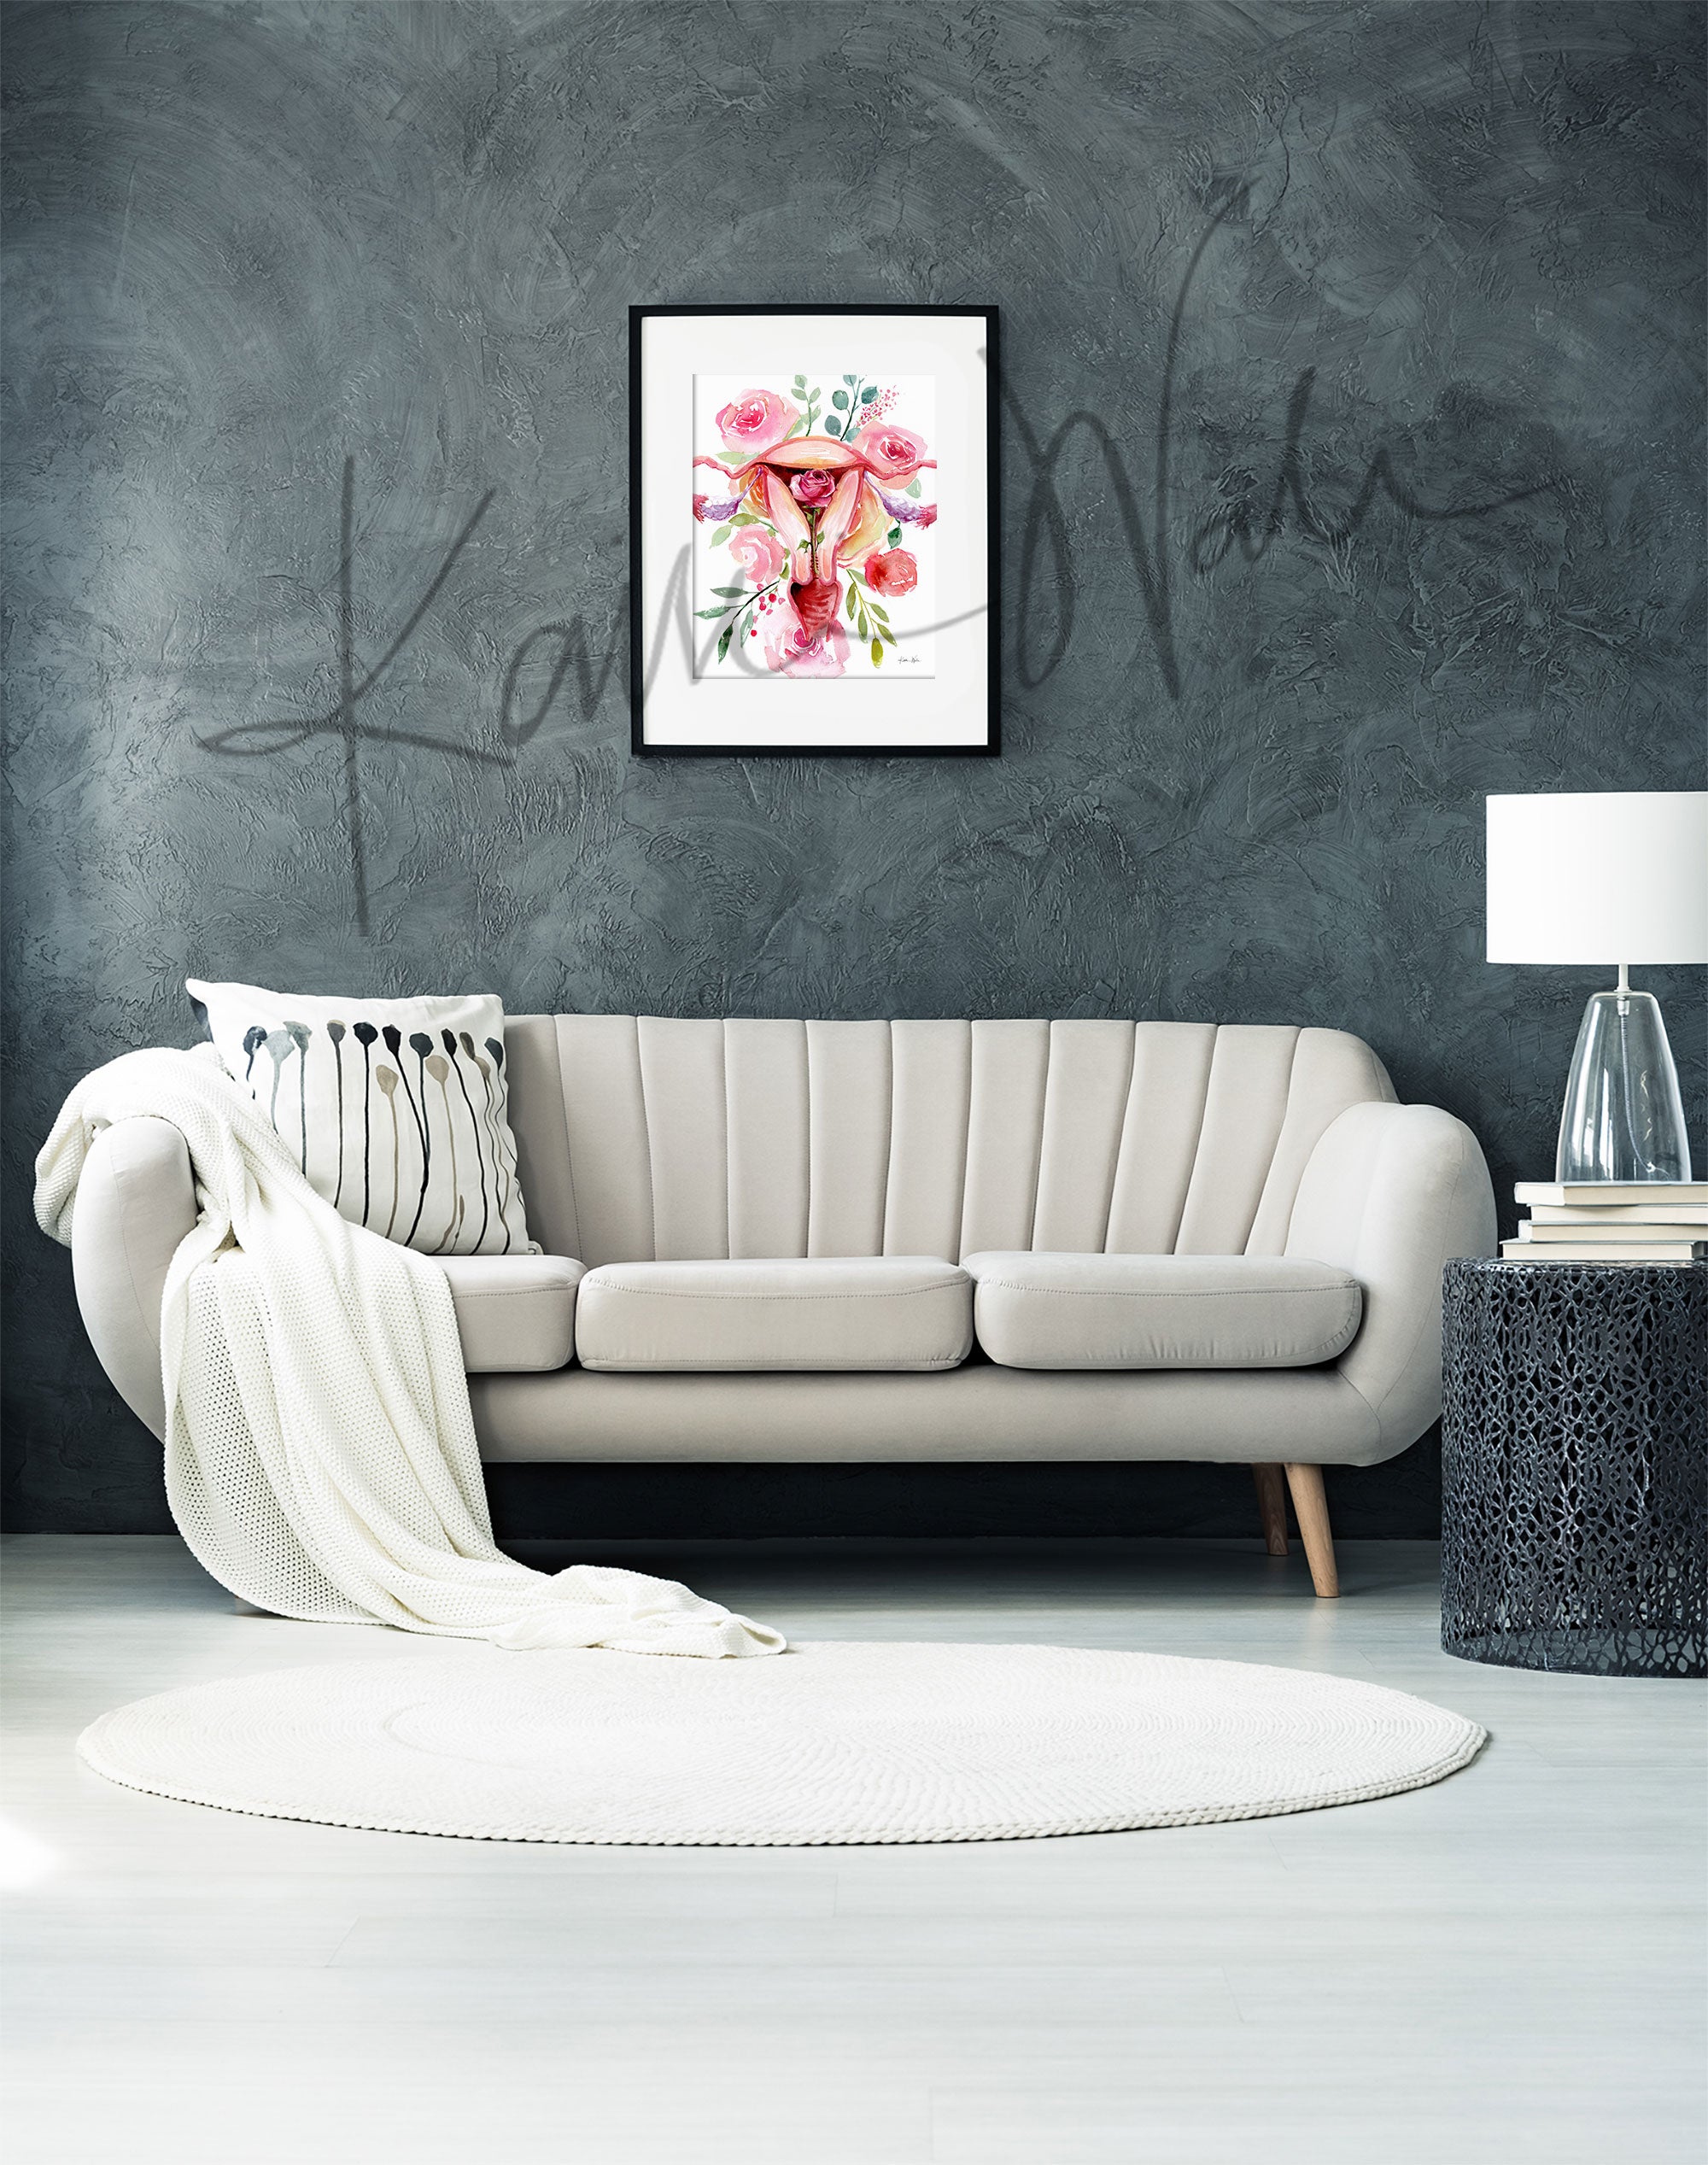 Framed watercolor painting of a uterus with flowers around. The painting is hanging over a white couch.